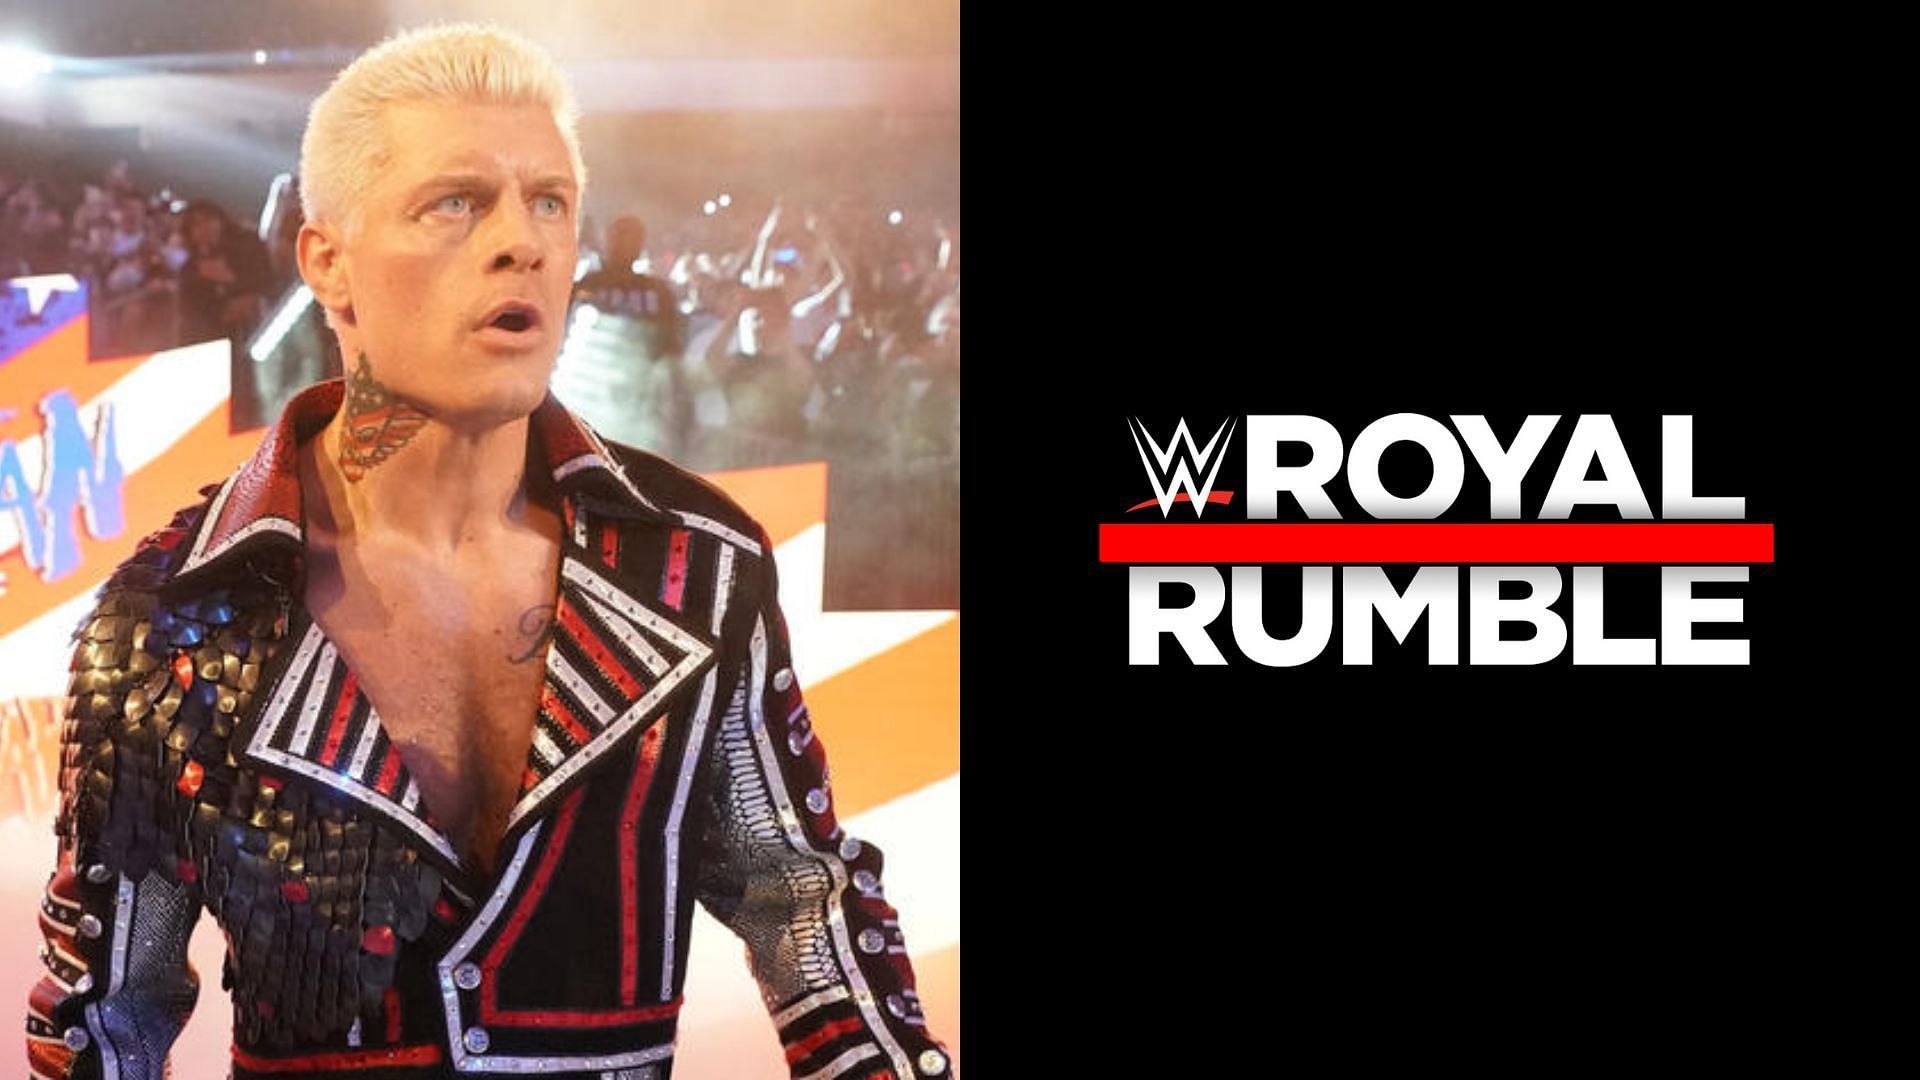 "I'm really glad someone caught it" - Cody Rhodes comments on the message he sent to WWE Hall of Famer following WWE Royal Rumble